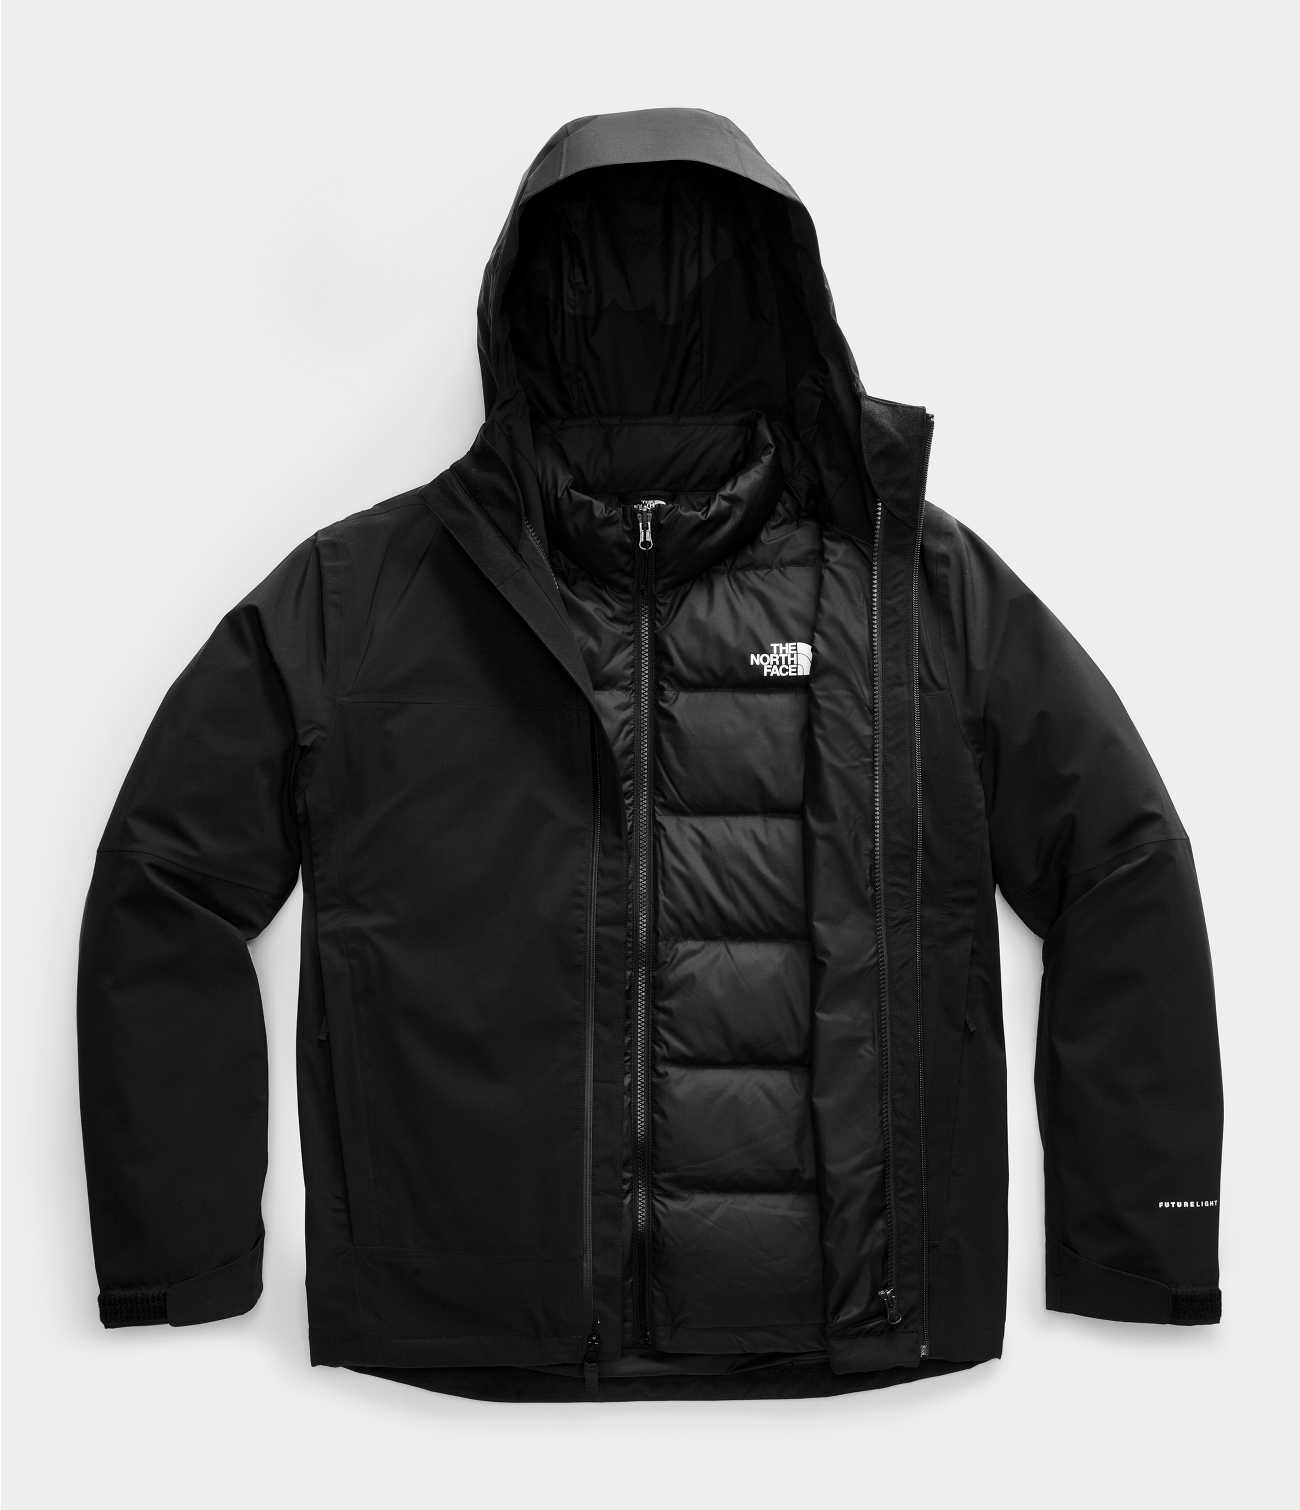 THE NORTH FACE MOUNTAIN LIGHT JACKAT